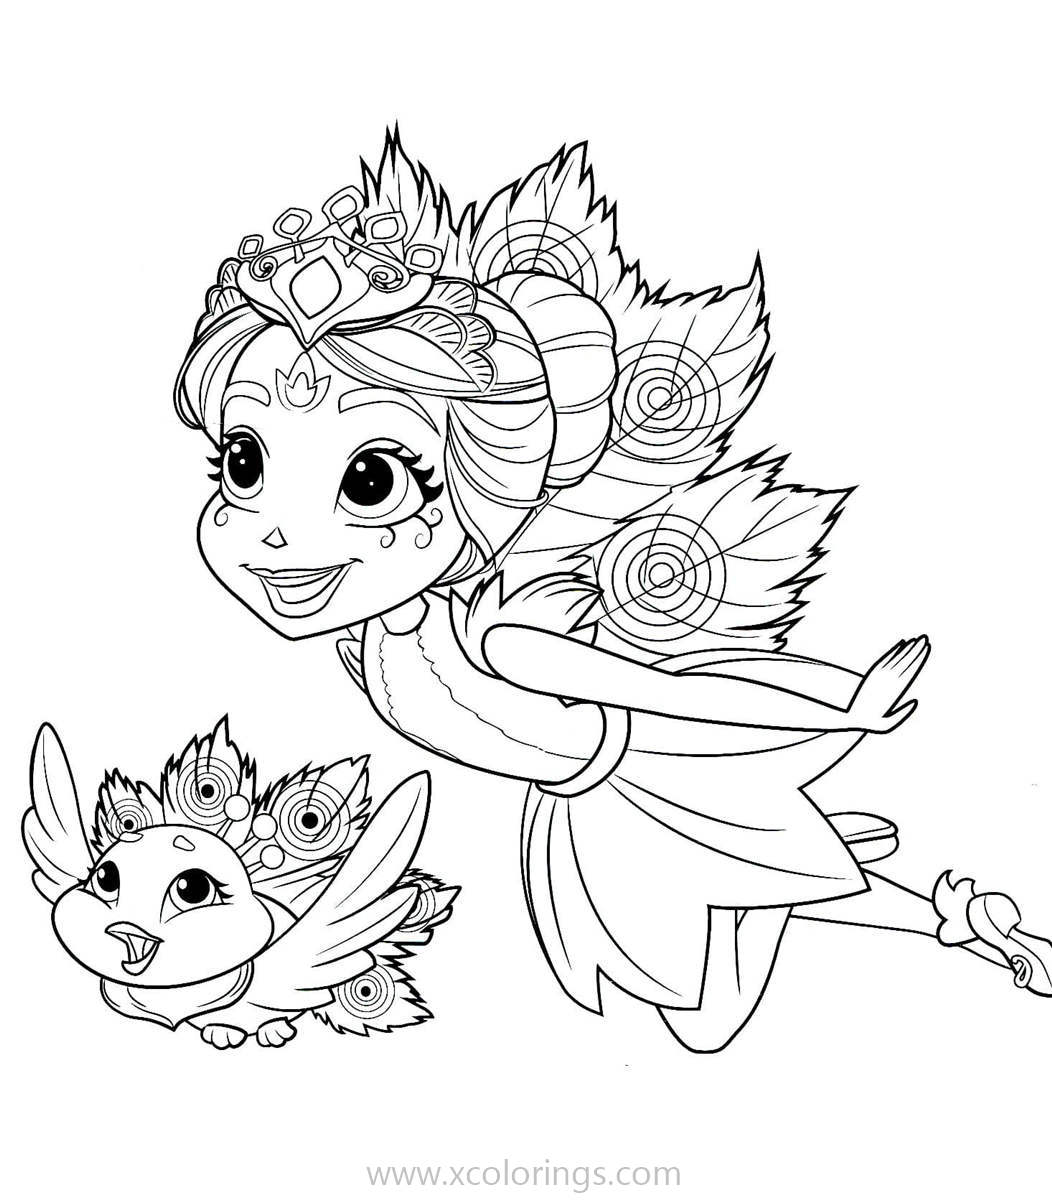 Free Enchantimals Coloring Pages Patter Peacock and Flap Are Flying printable